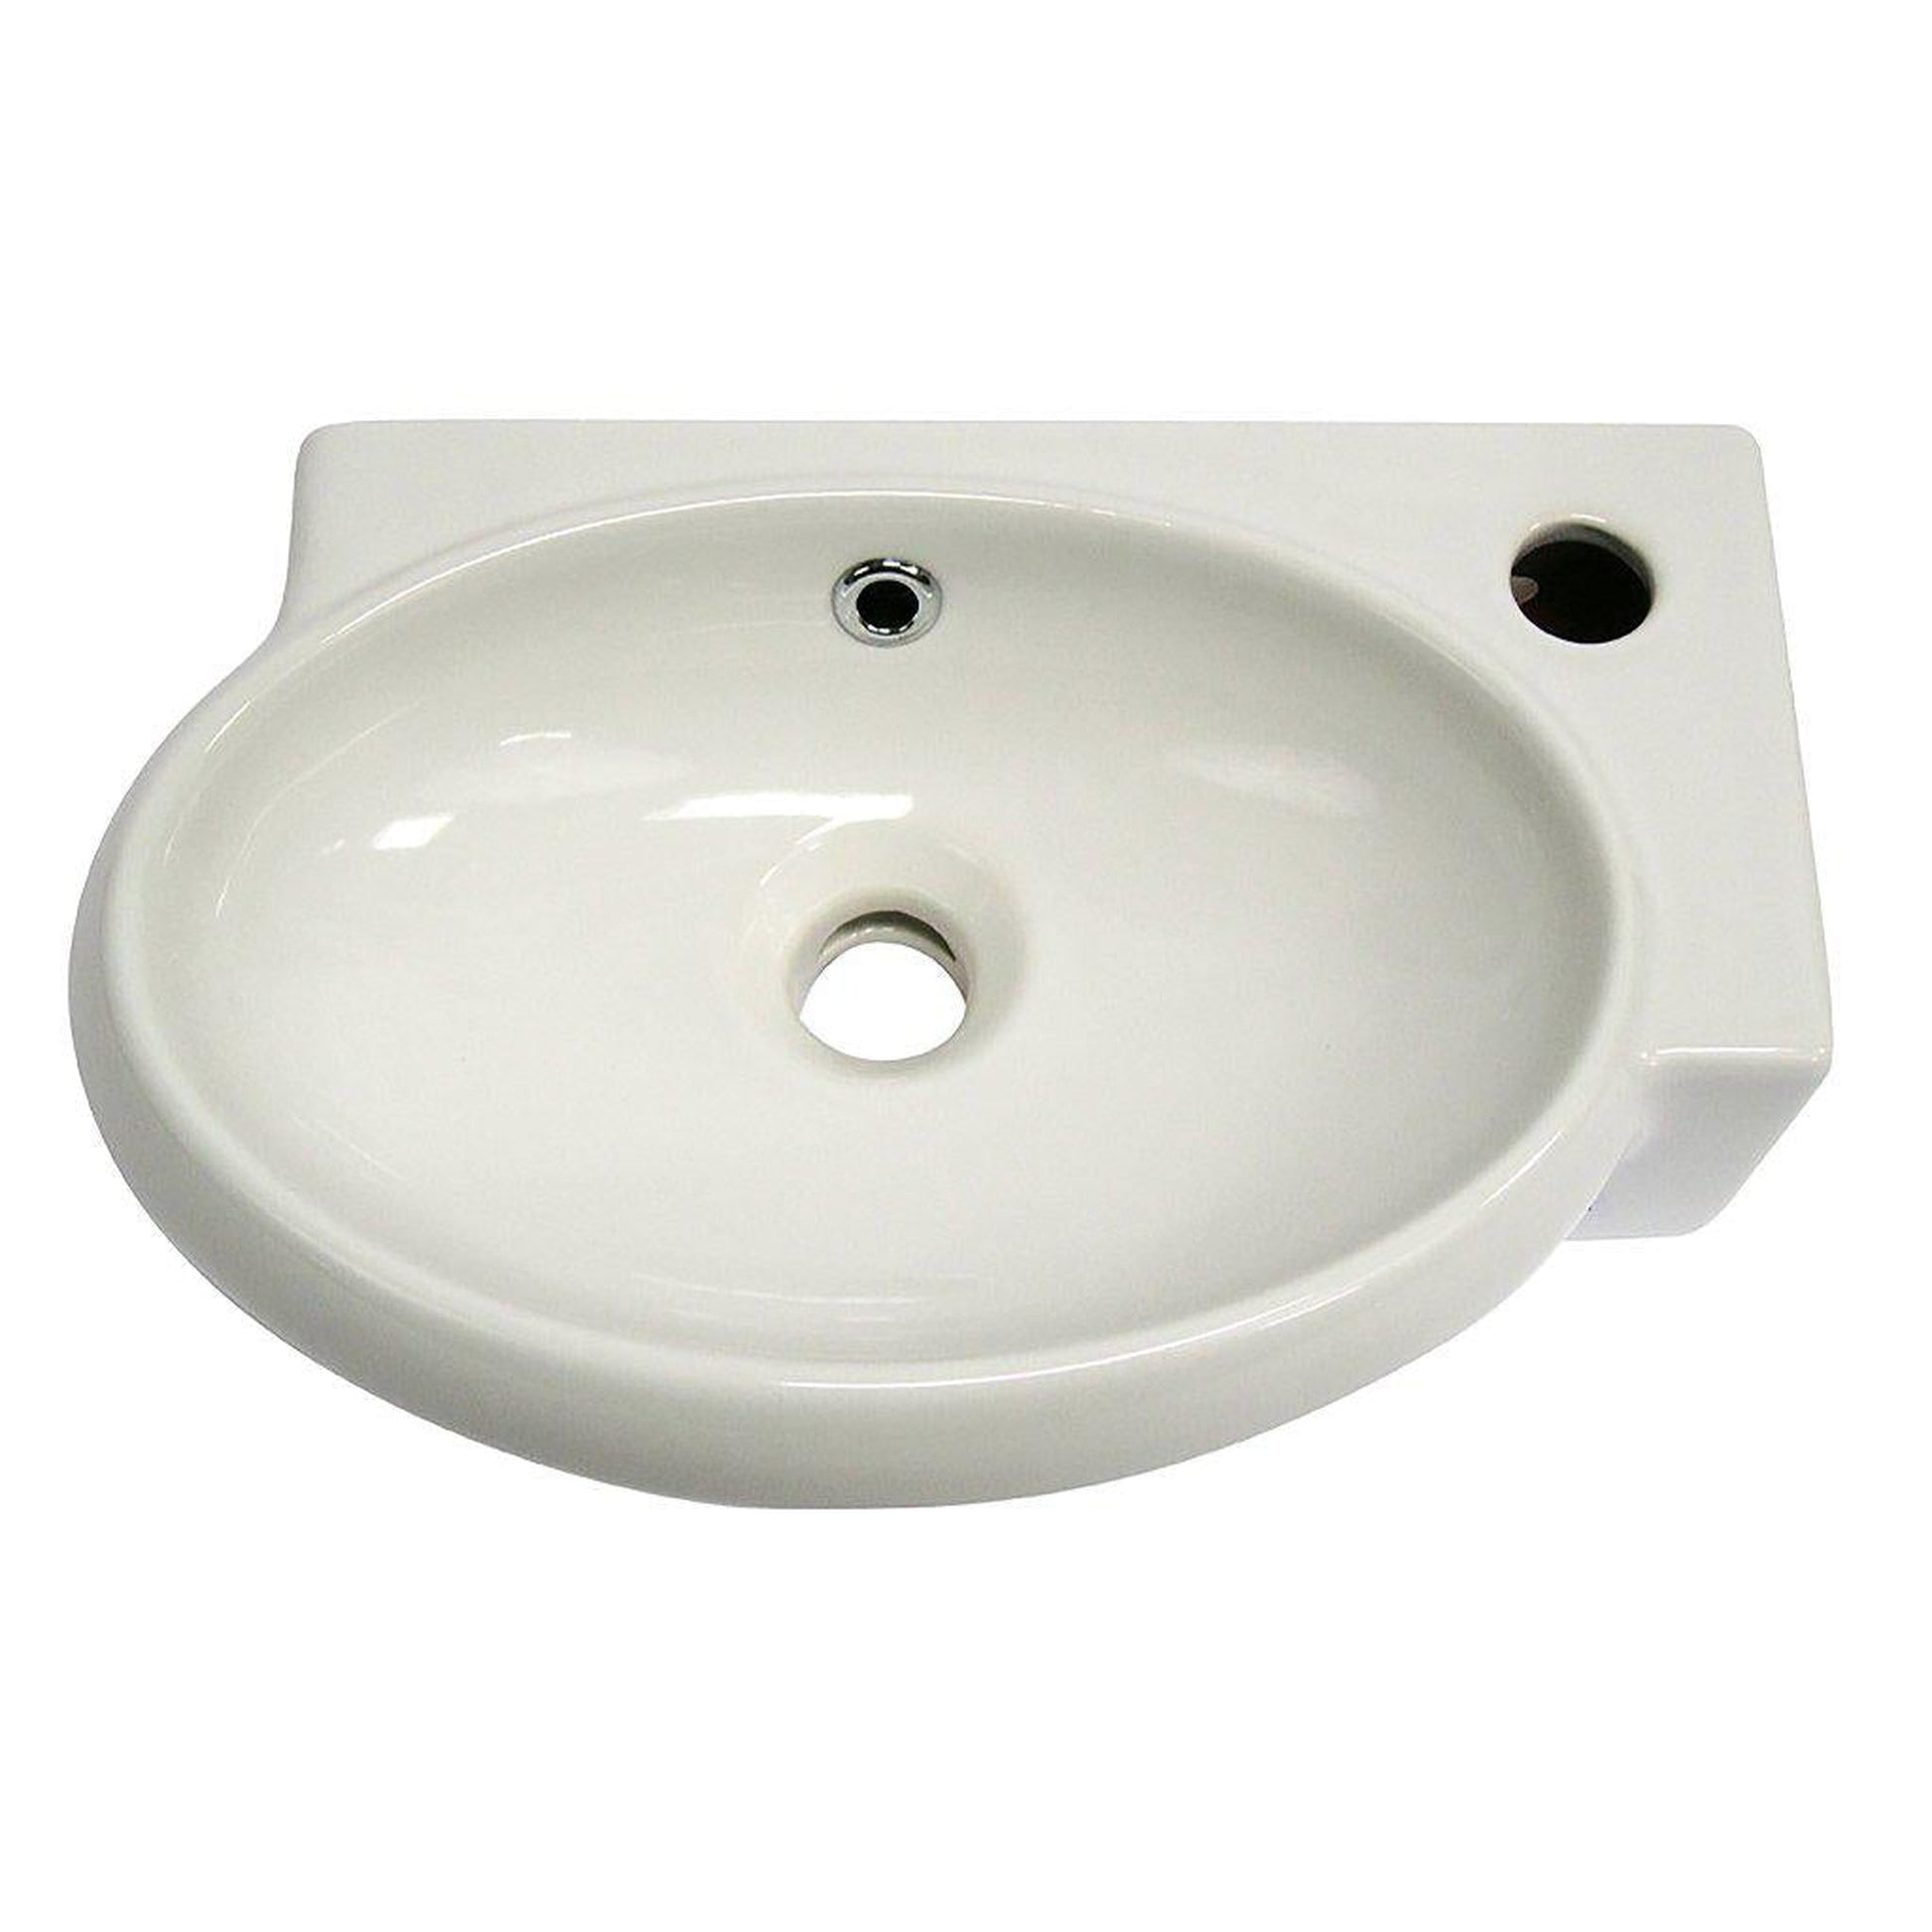 ALFI Brand AB107 17" White Wall-Mounted Euro Styled Oval Ceramic Bathroom Sink With Single Faucet Hole and Overflow